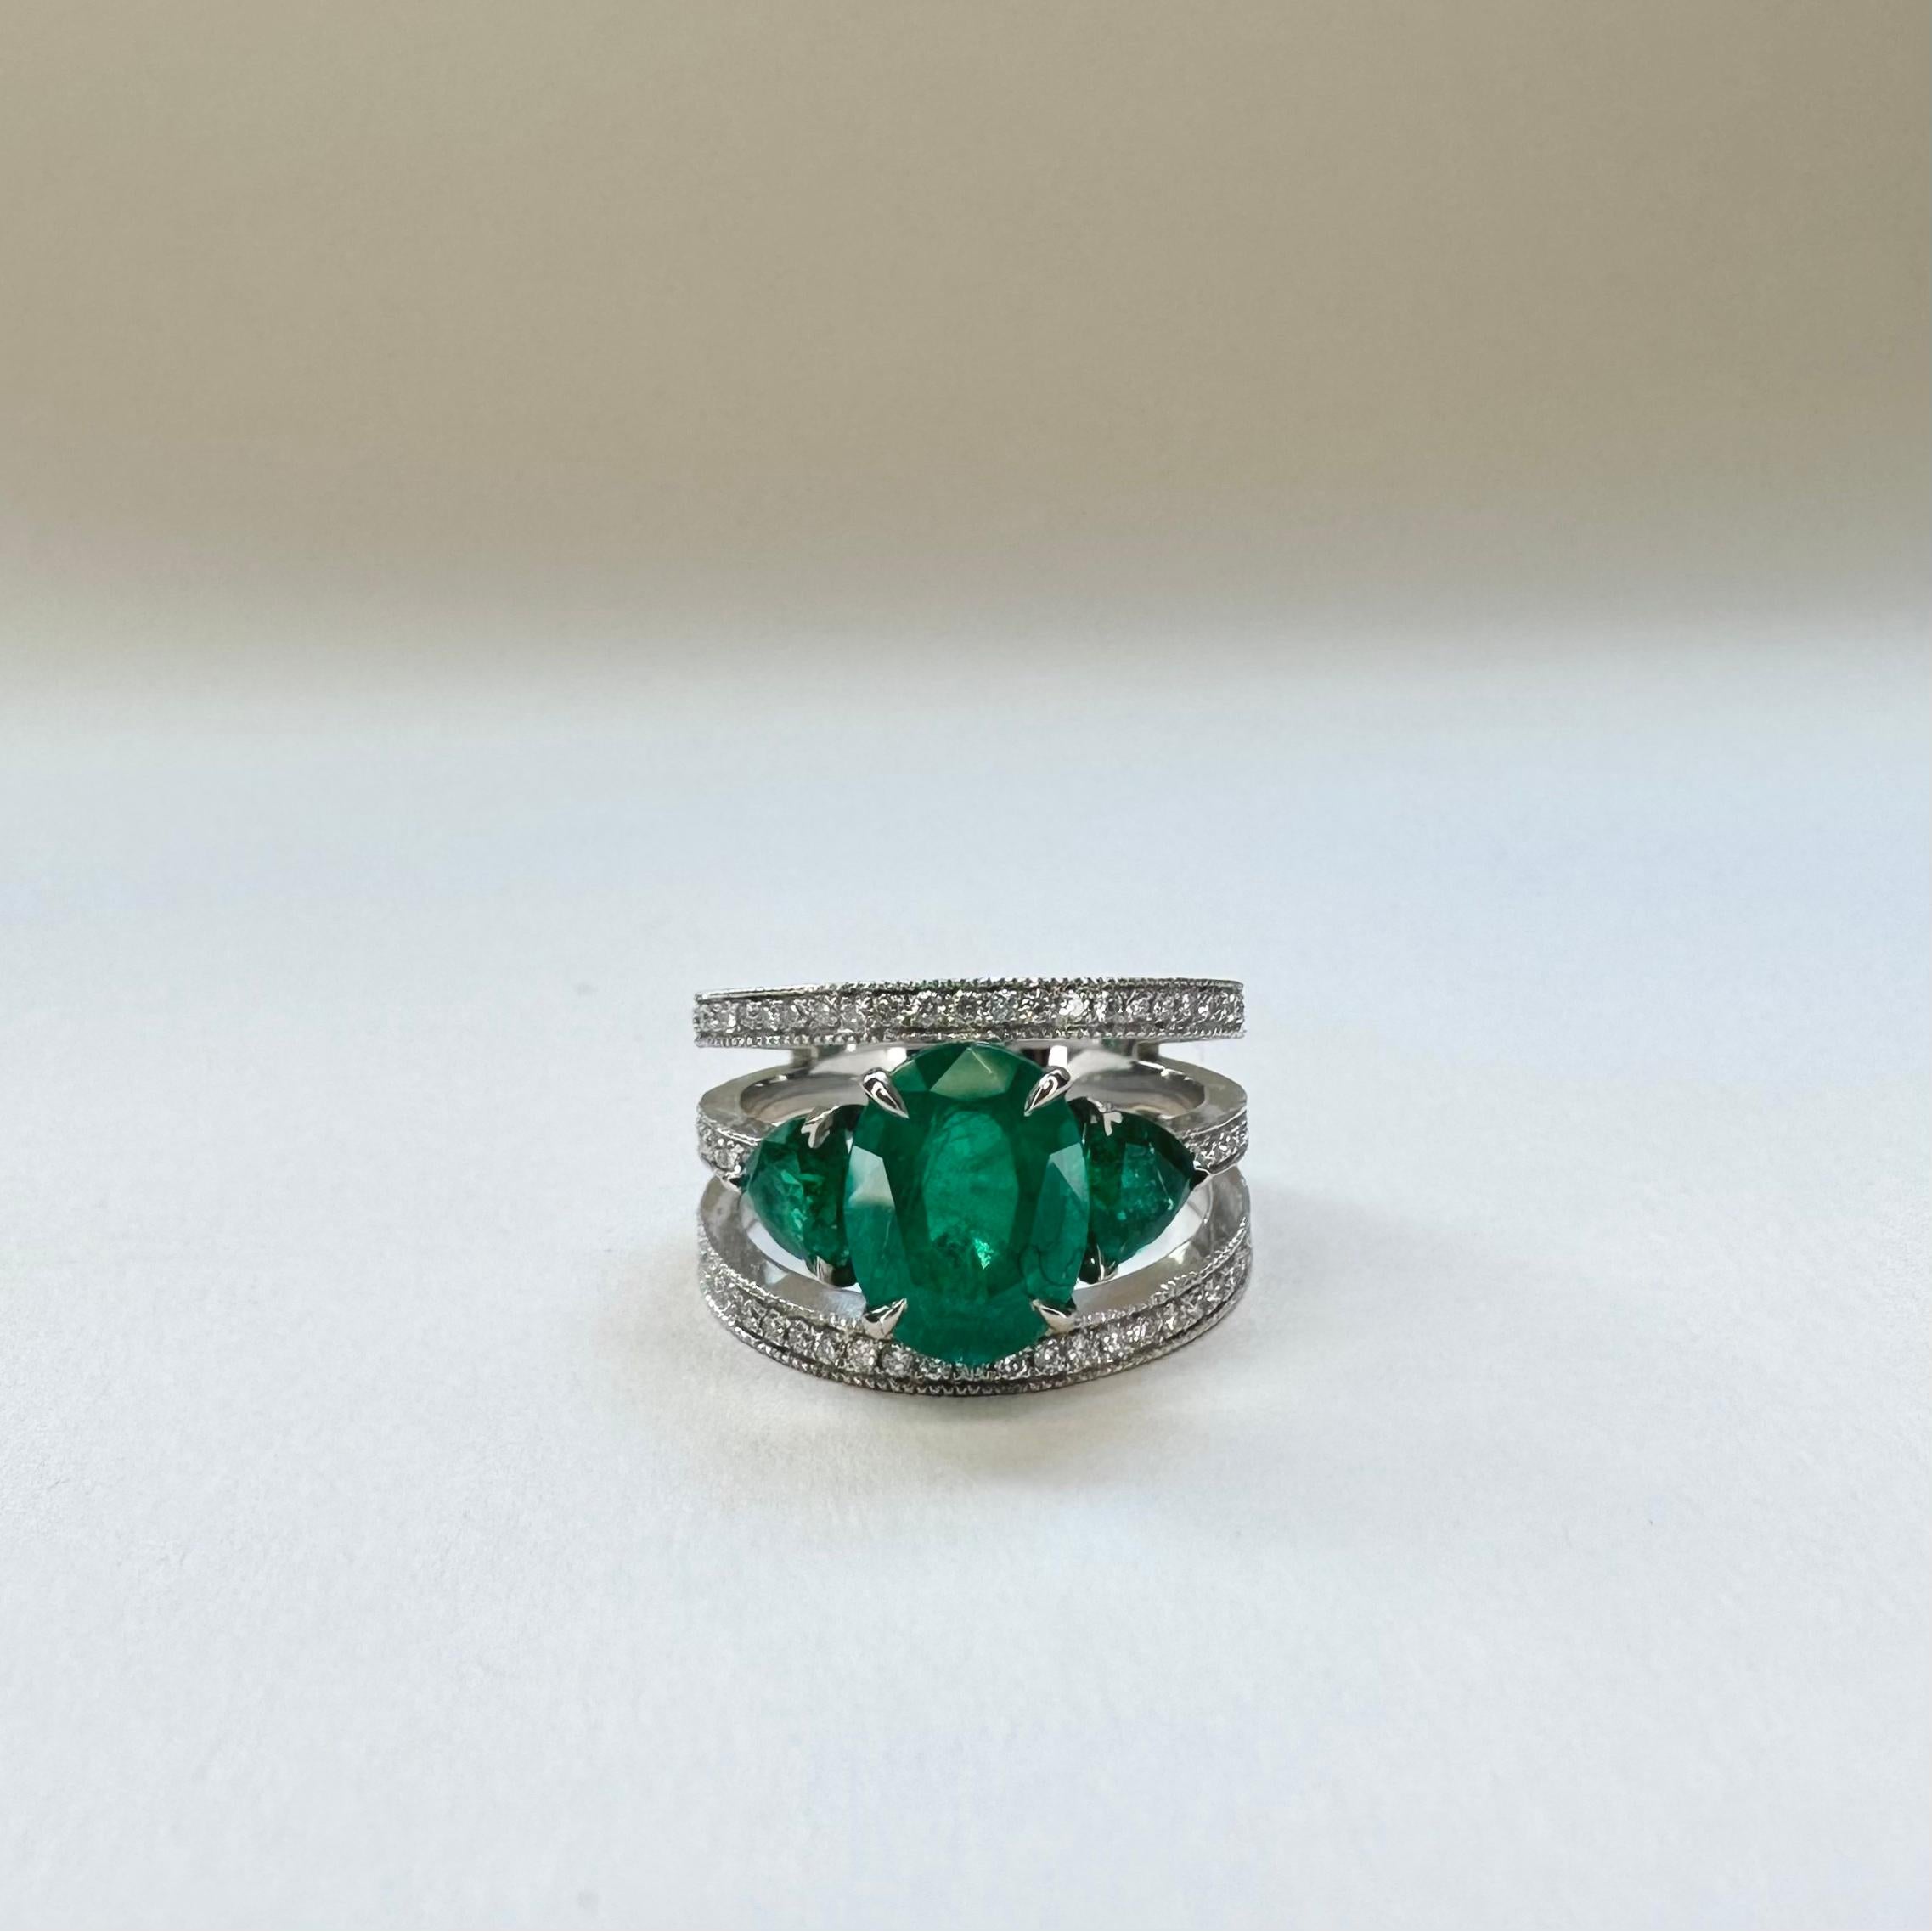 For Sale:  18k White Gold 2.51 Ct Vivid Green Oval Emerald Band Ring, 2 Troidia Emeralds 3